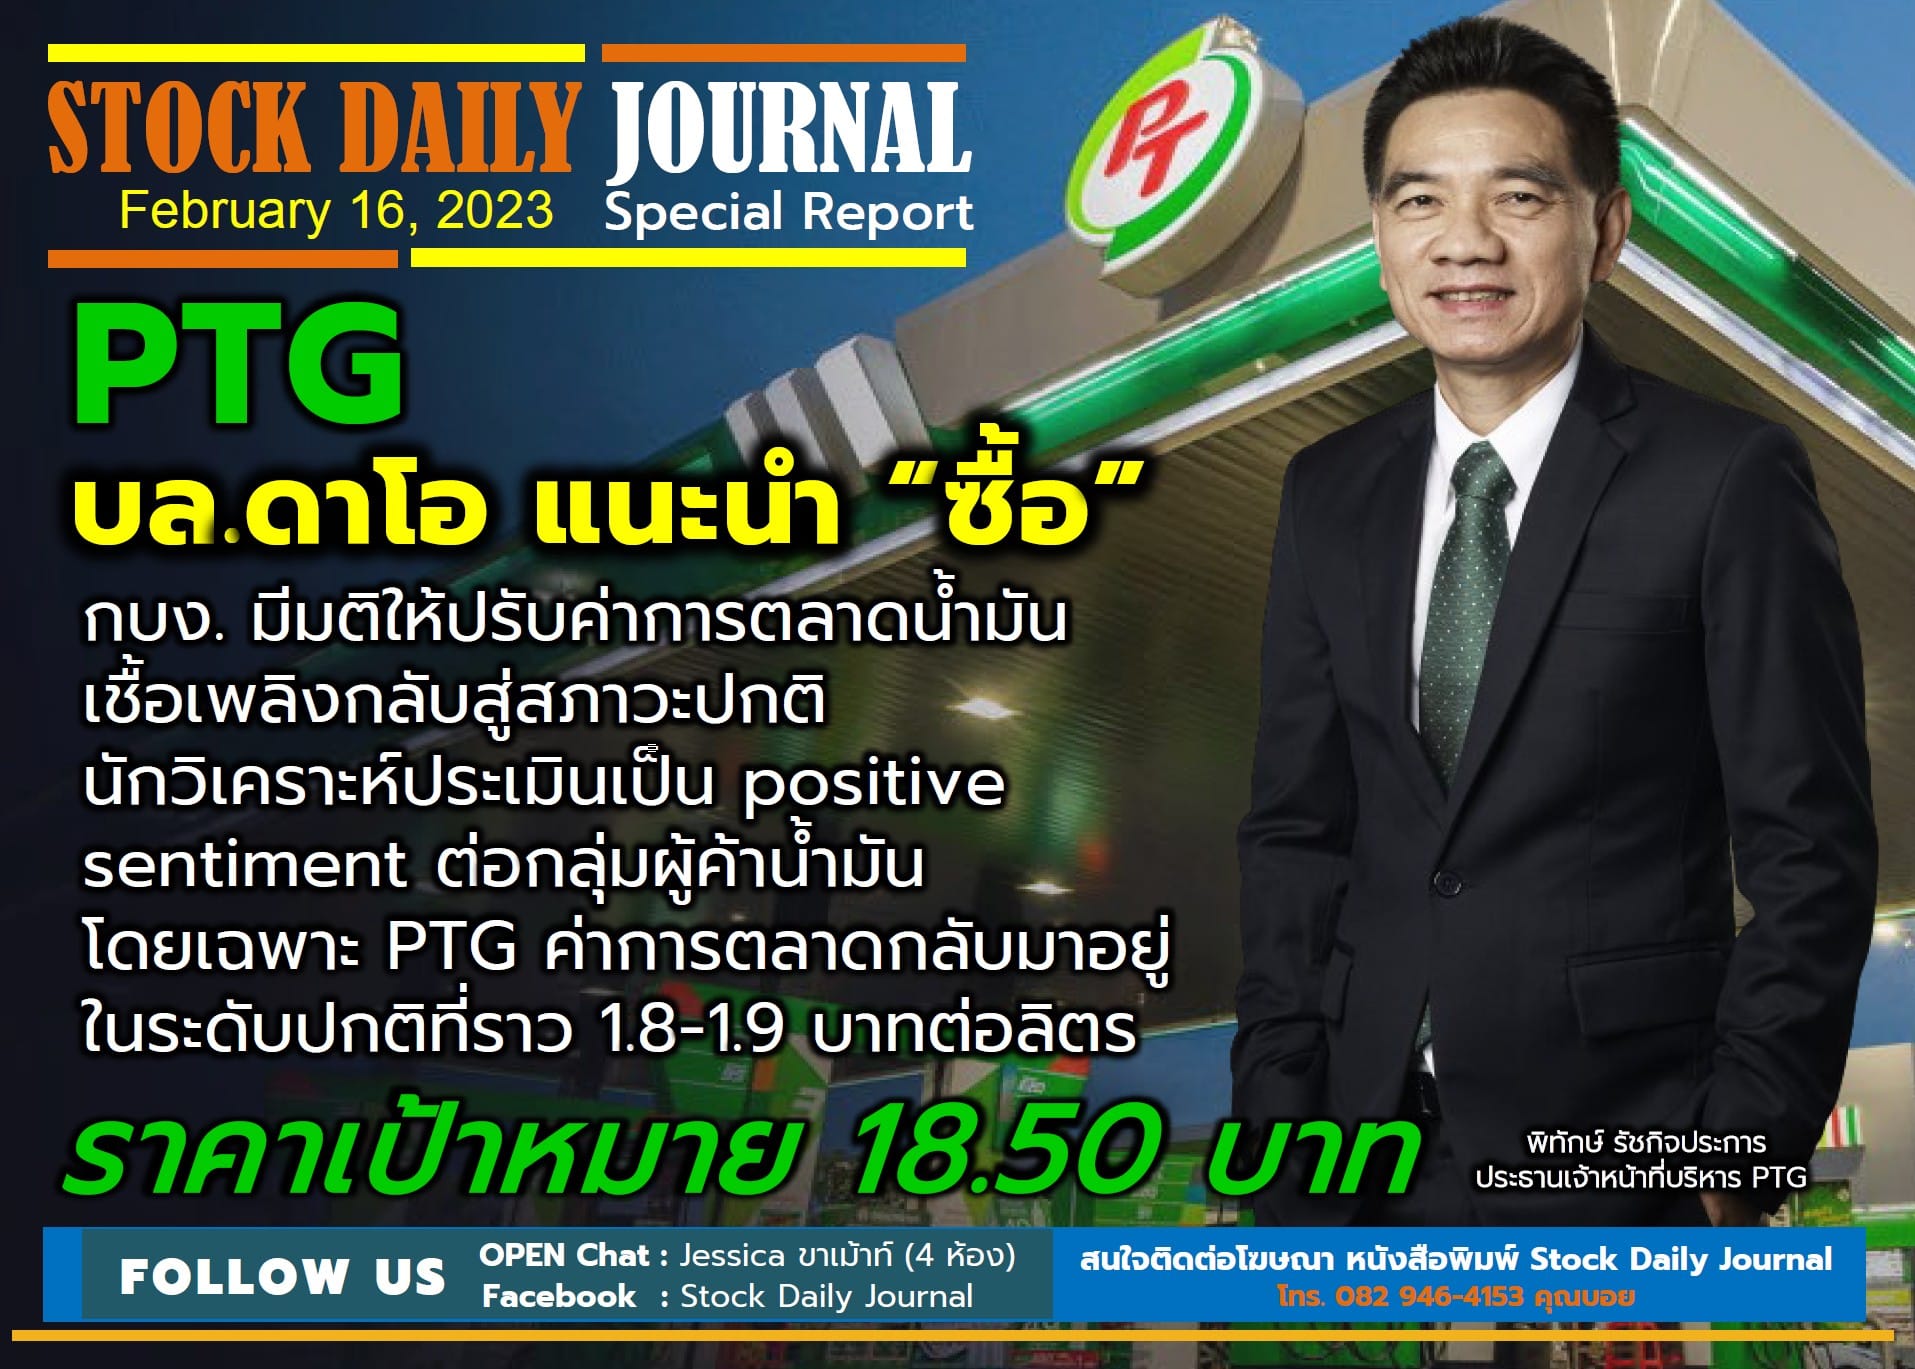 STOCK DAILY JOURNAL “Special Report : PTG”